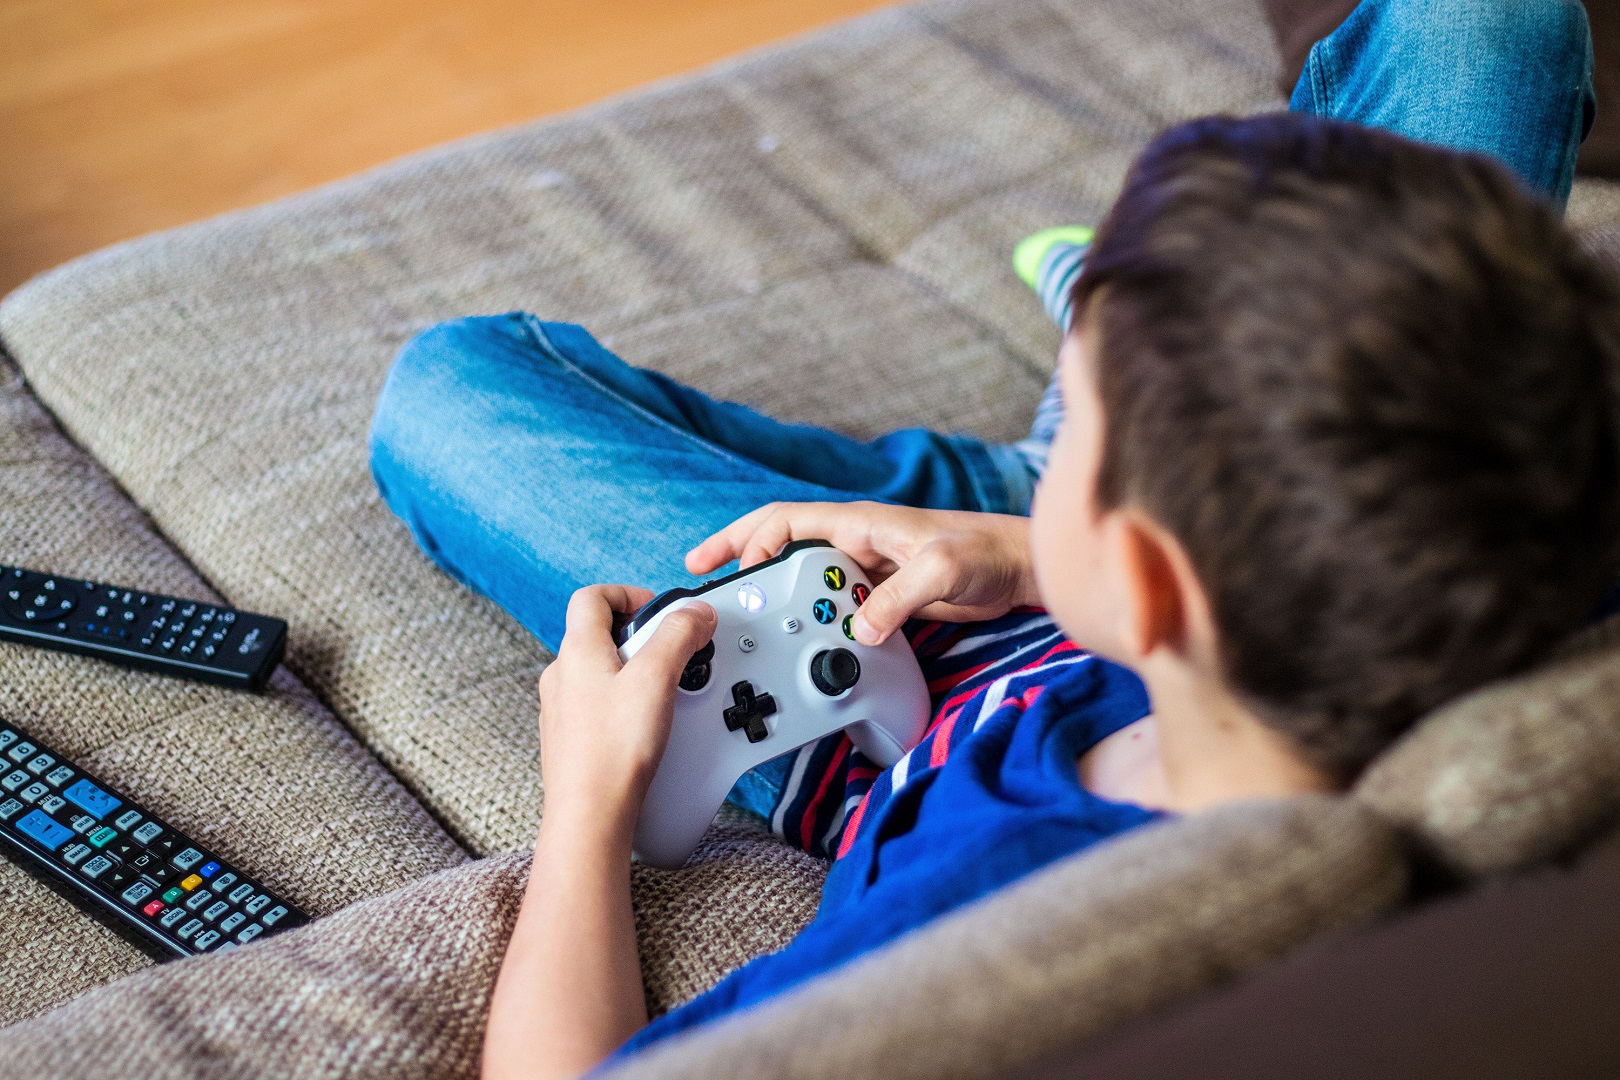 Things you should know about online gaming.